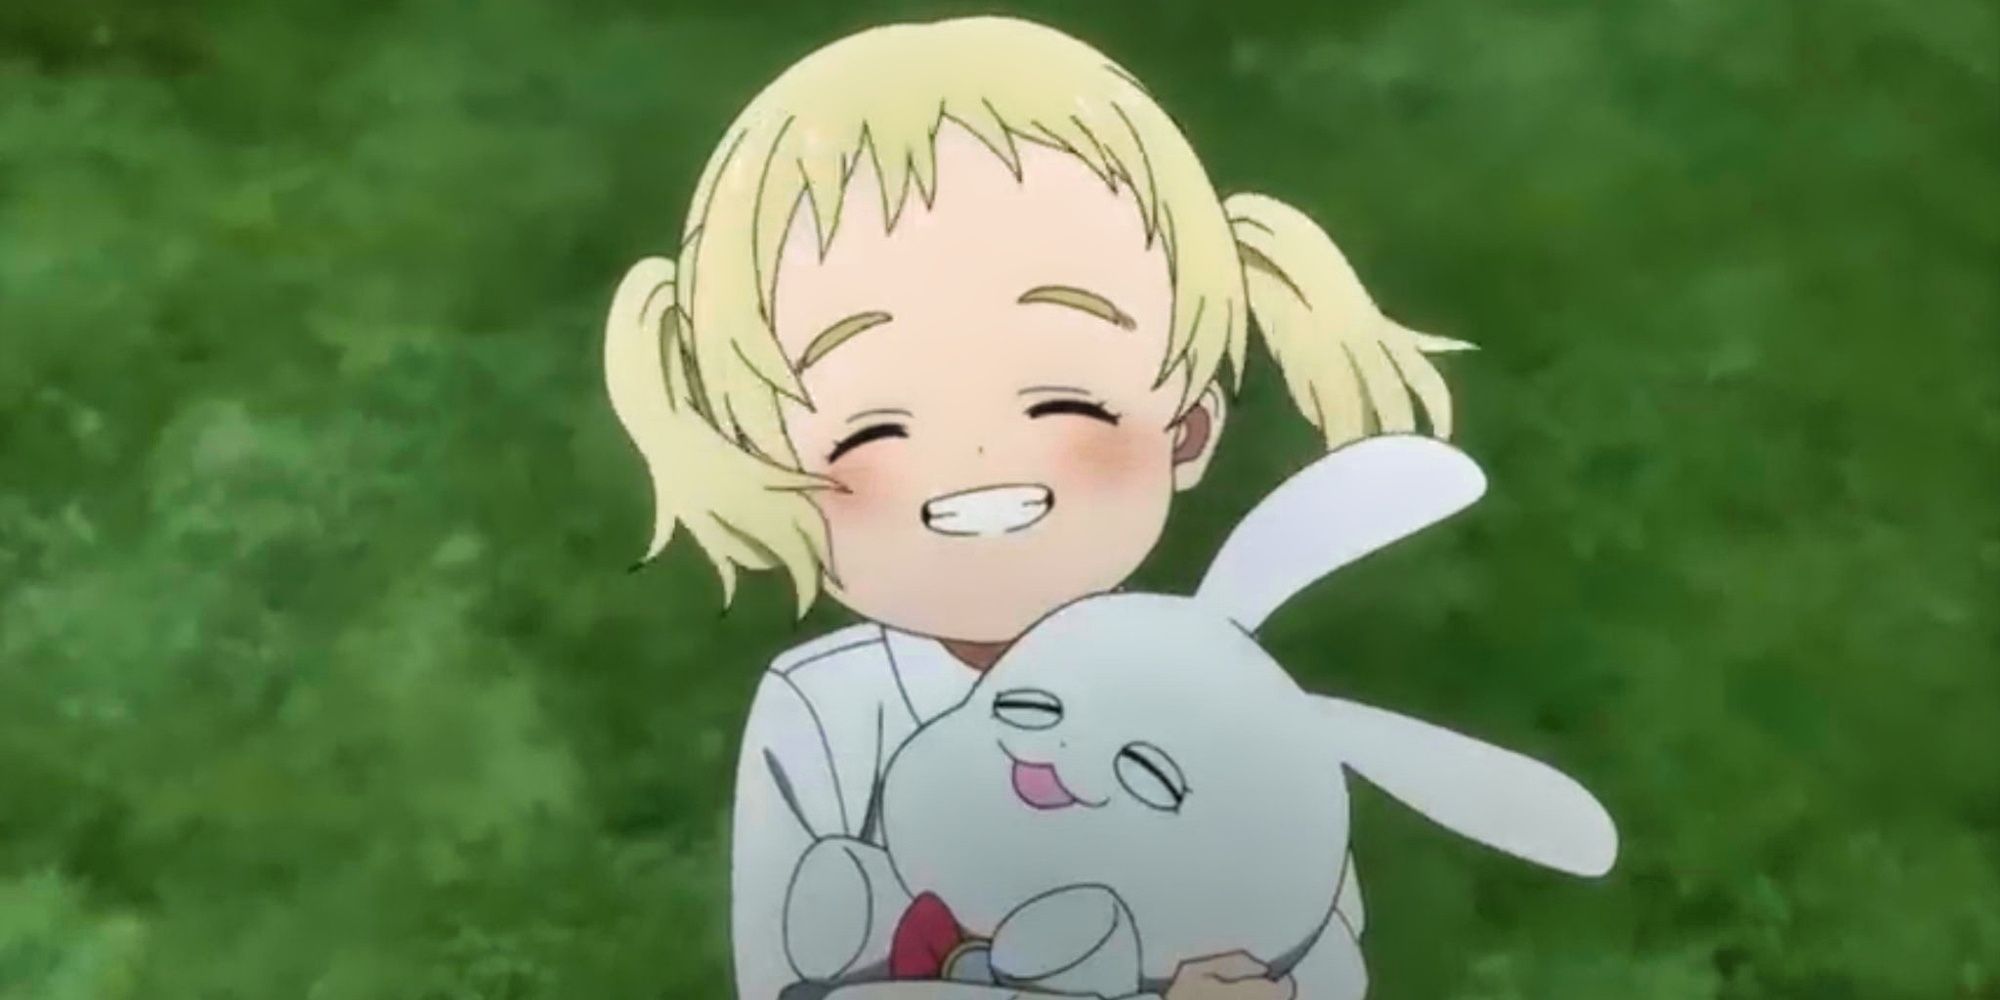 A young girl holds a bunny in The Promised Neverland